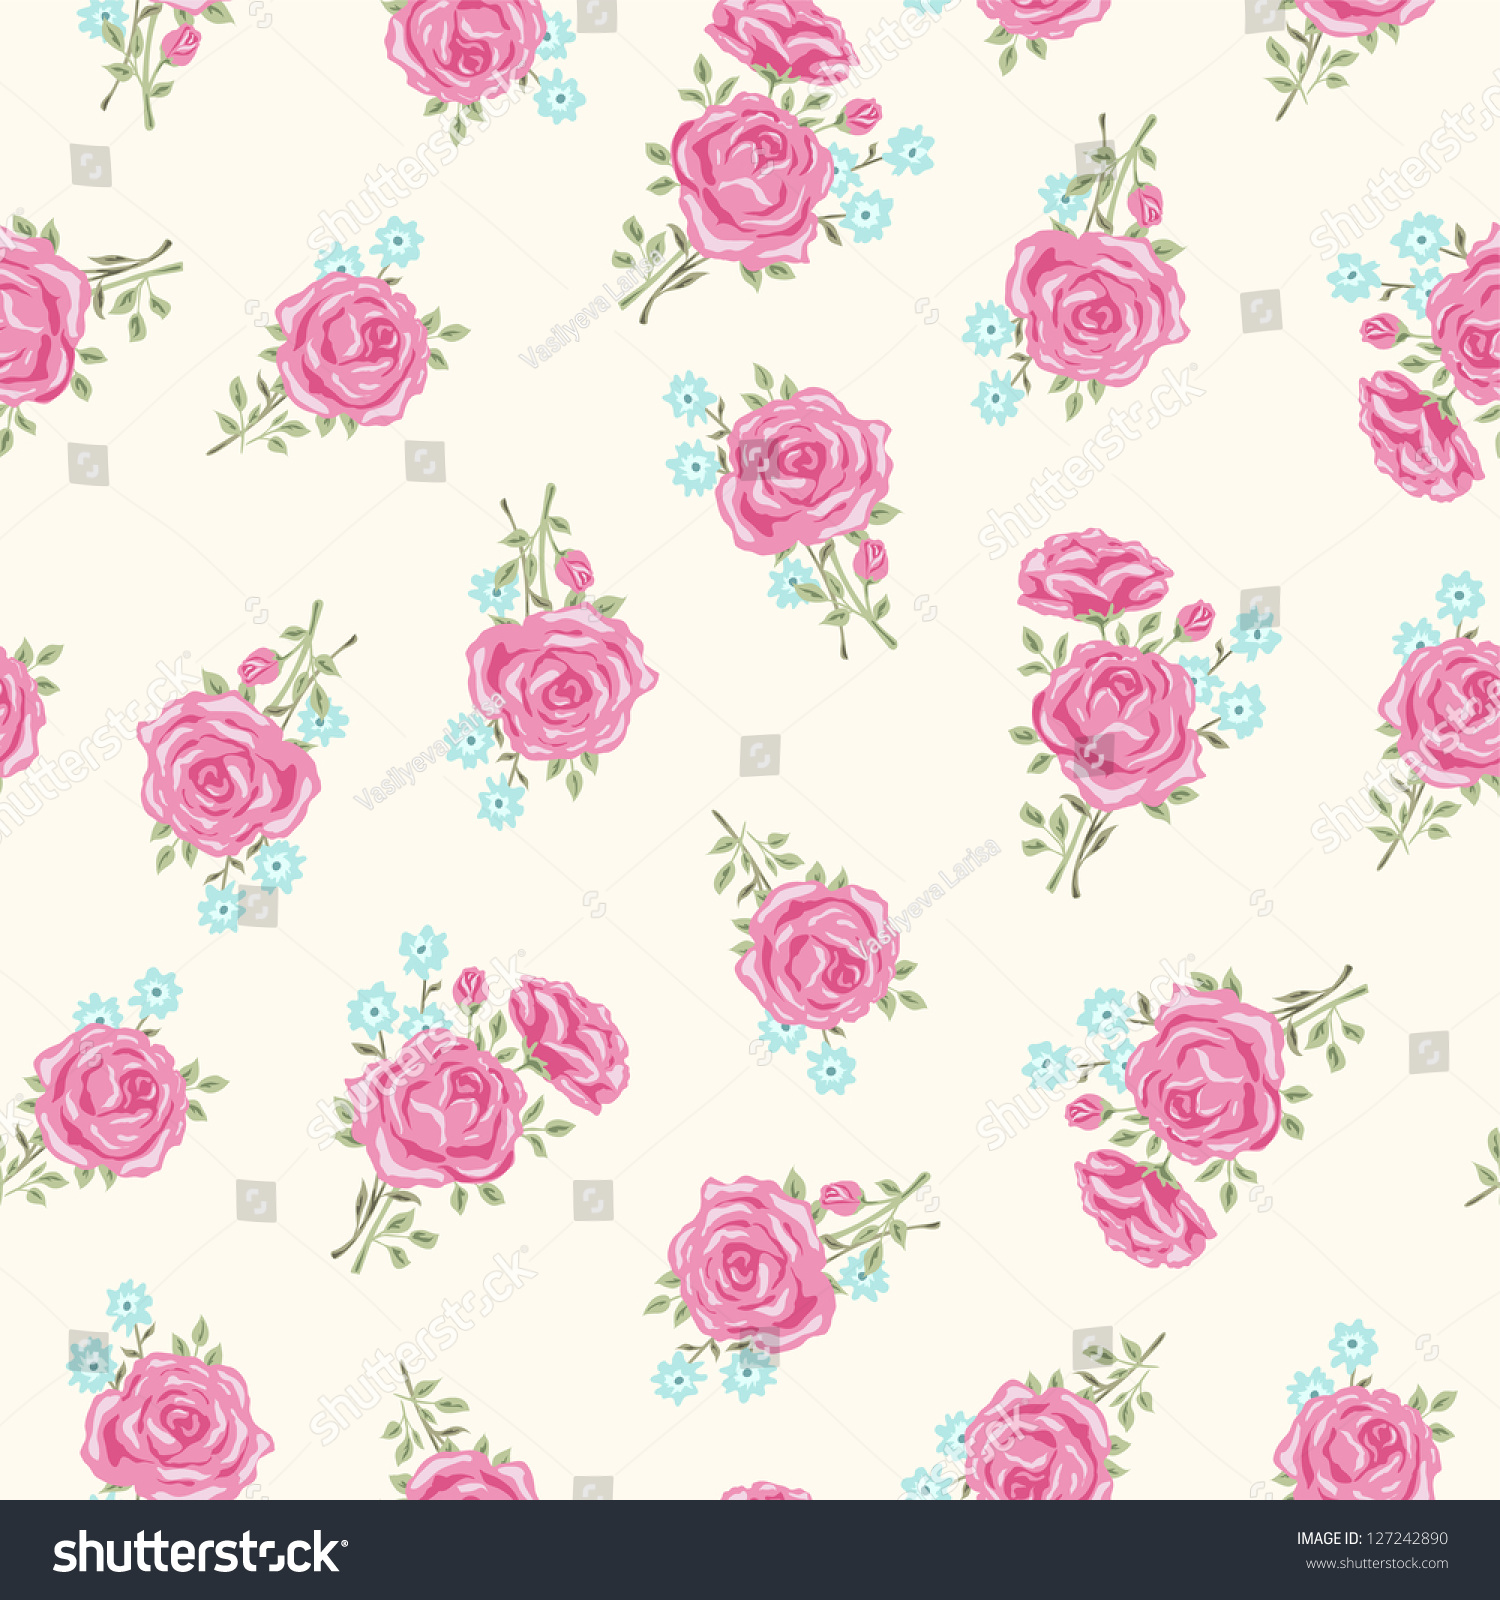 Shabby Chic Rose Pattern Floral Seamless Stock Vector 127242890